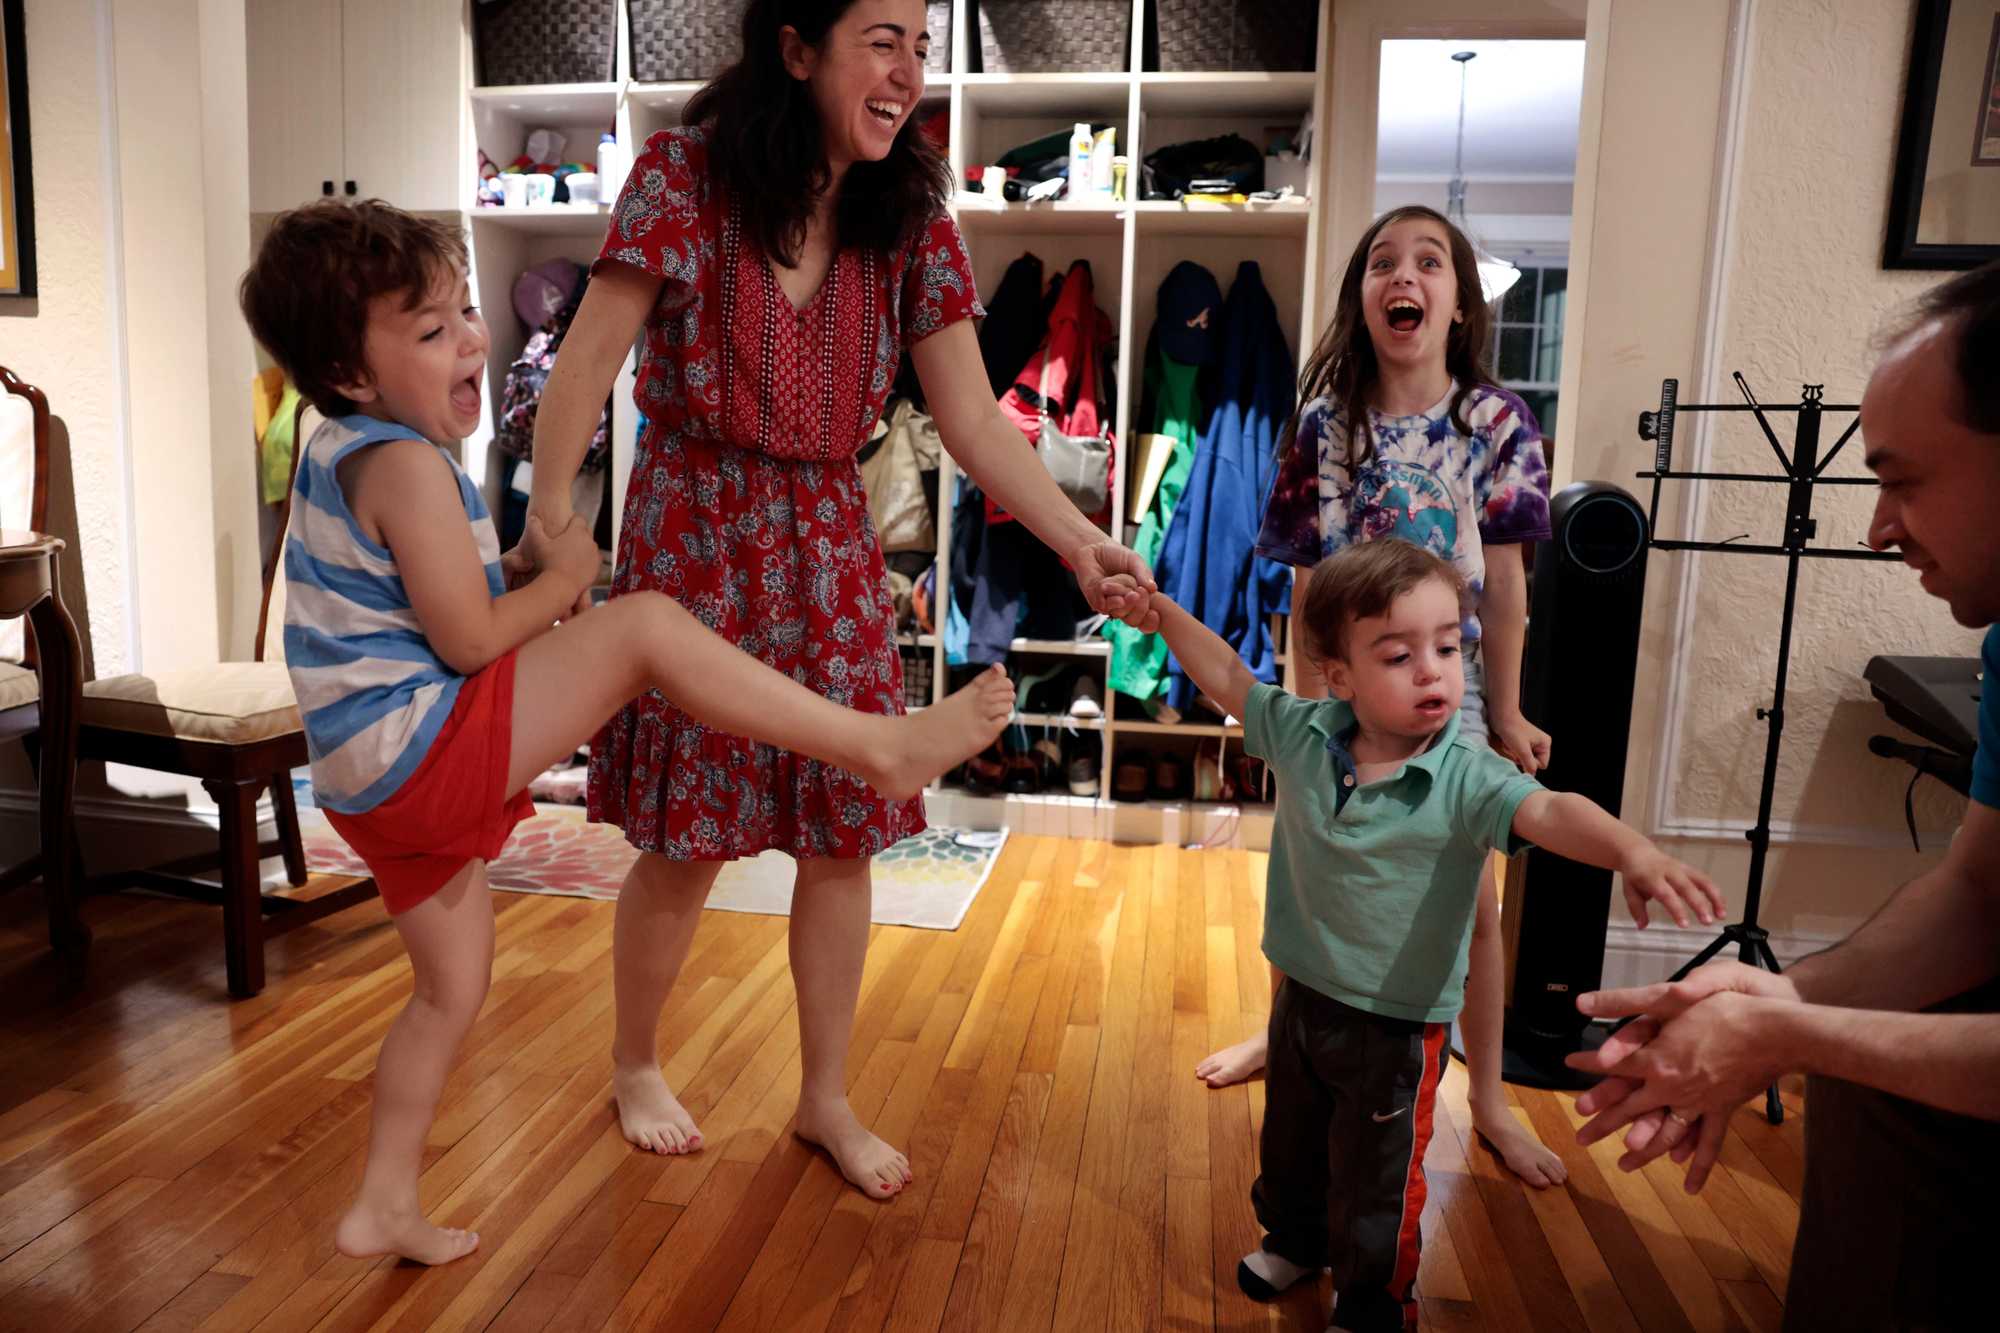 Amanda Zimmerman and Jeff Wachter at home with their children, Jacob, 6, (left) Alana, 9, and Micah, 2. The couple helped form a pro-housing group, Brookline for Everyone, after seeing other families priced out of the town. 